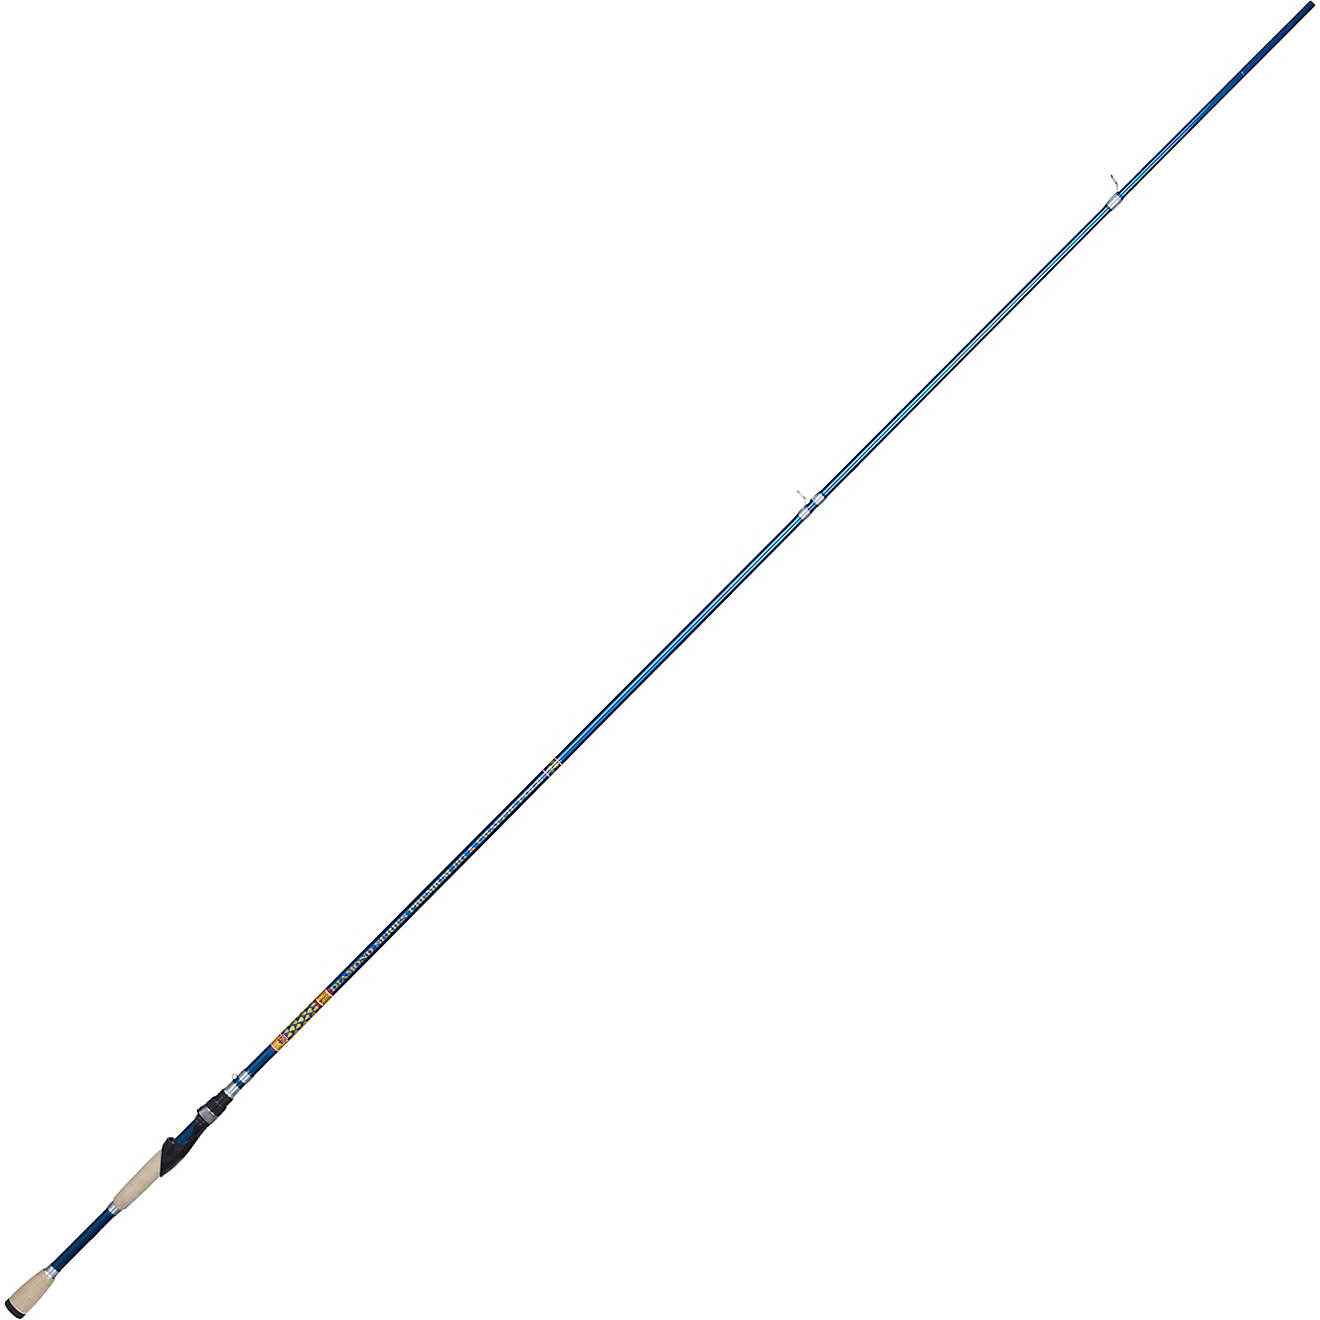 Emmrod Mountaineer 8 Coil Spin Fishing Pole w/D.C.M Open Face Reel